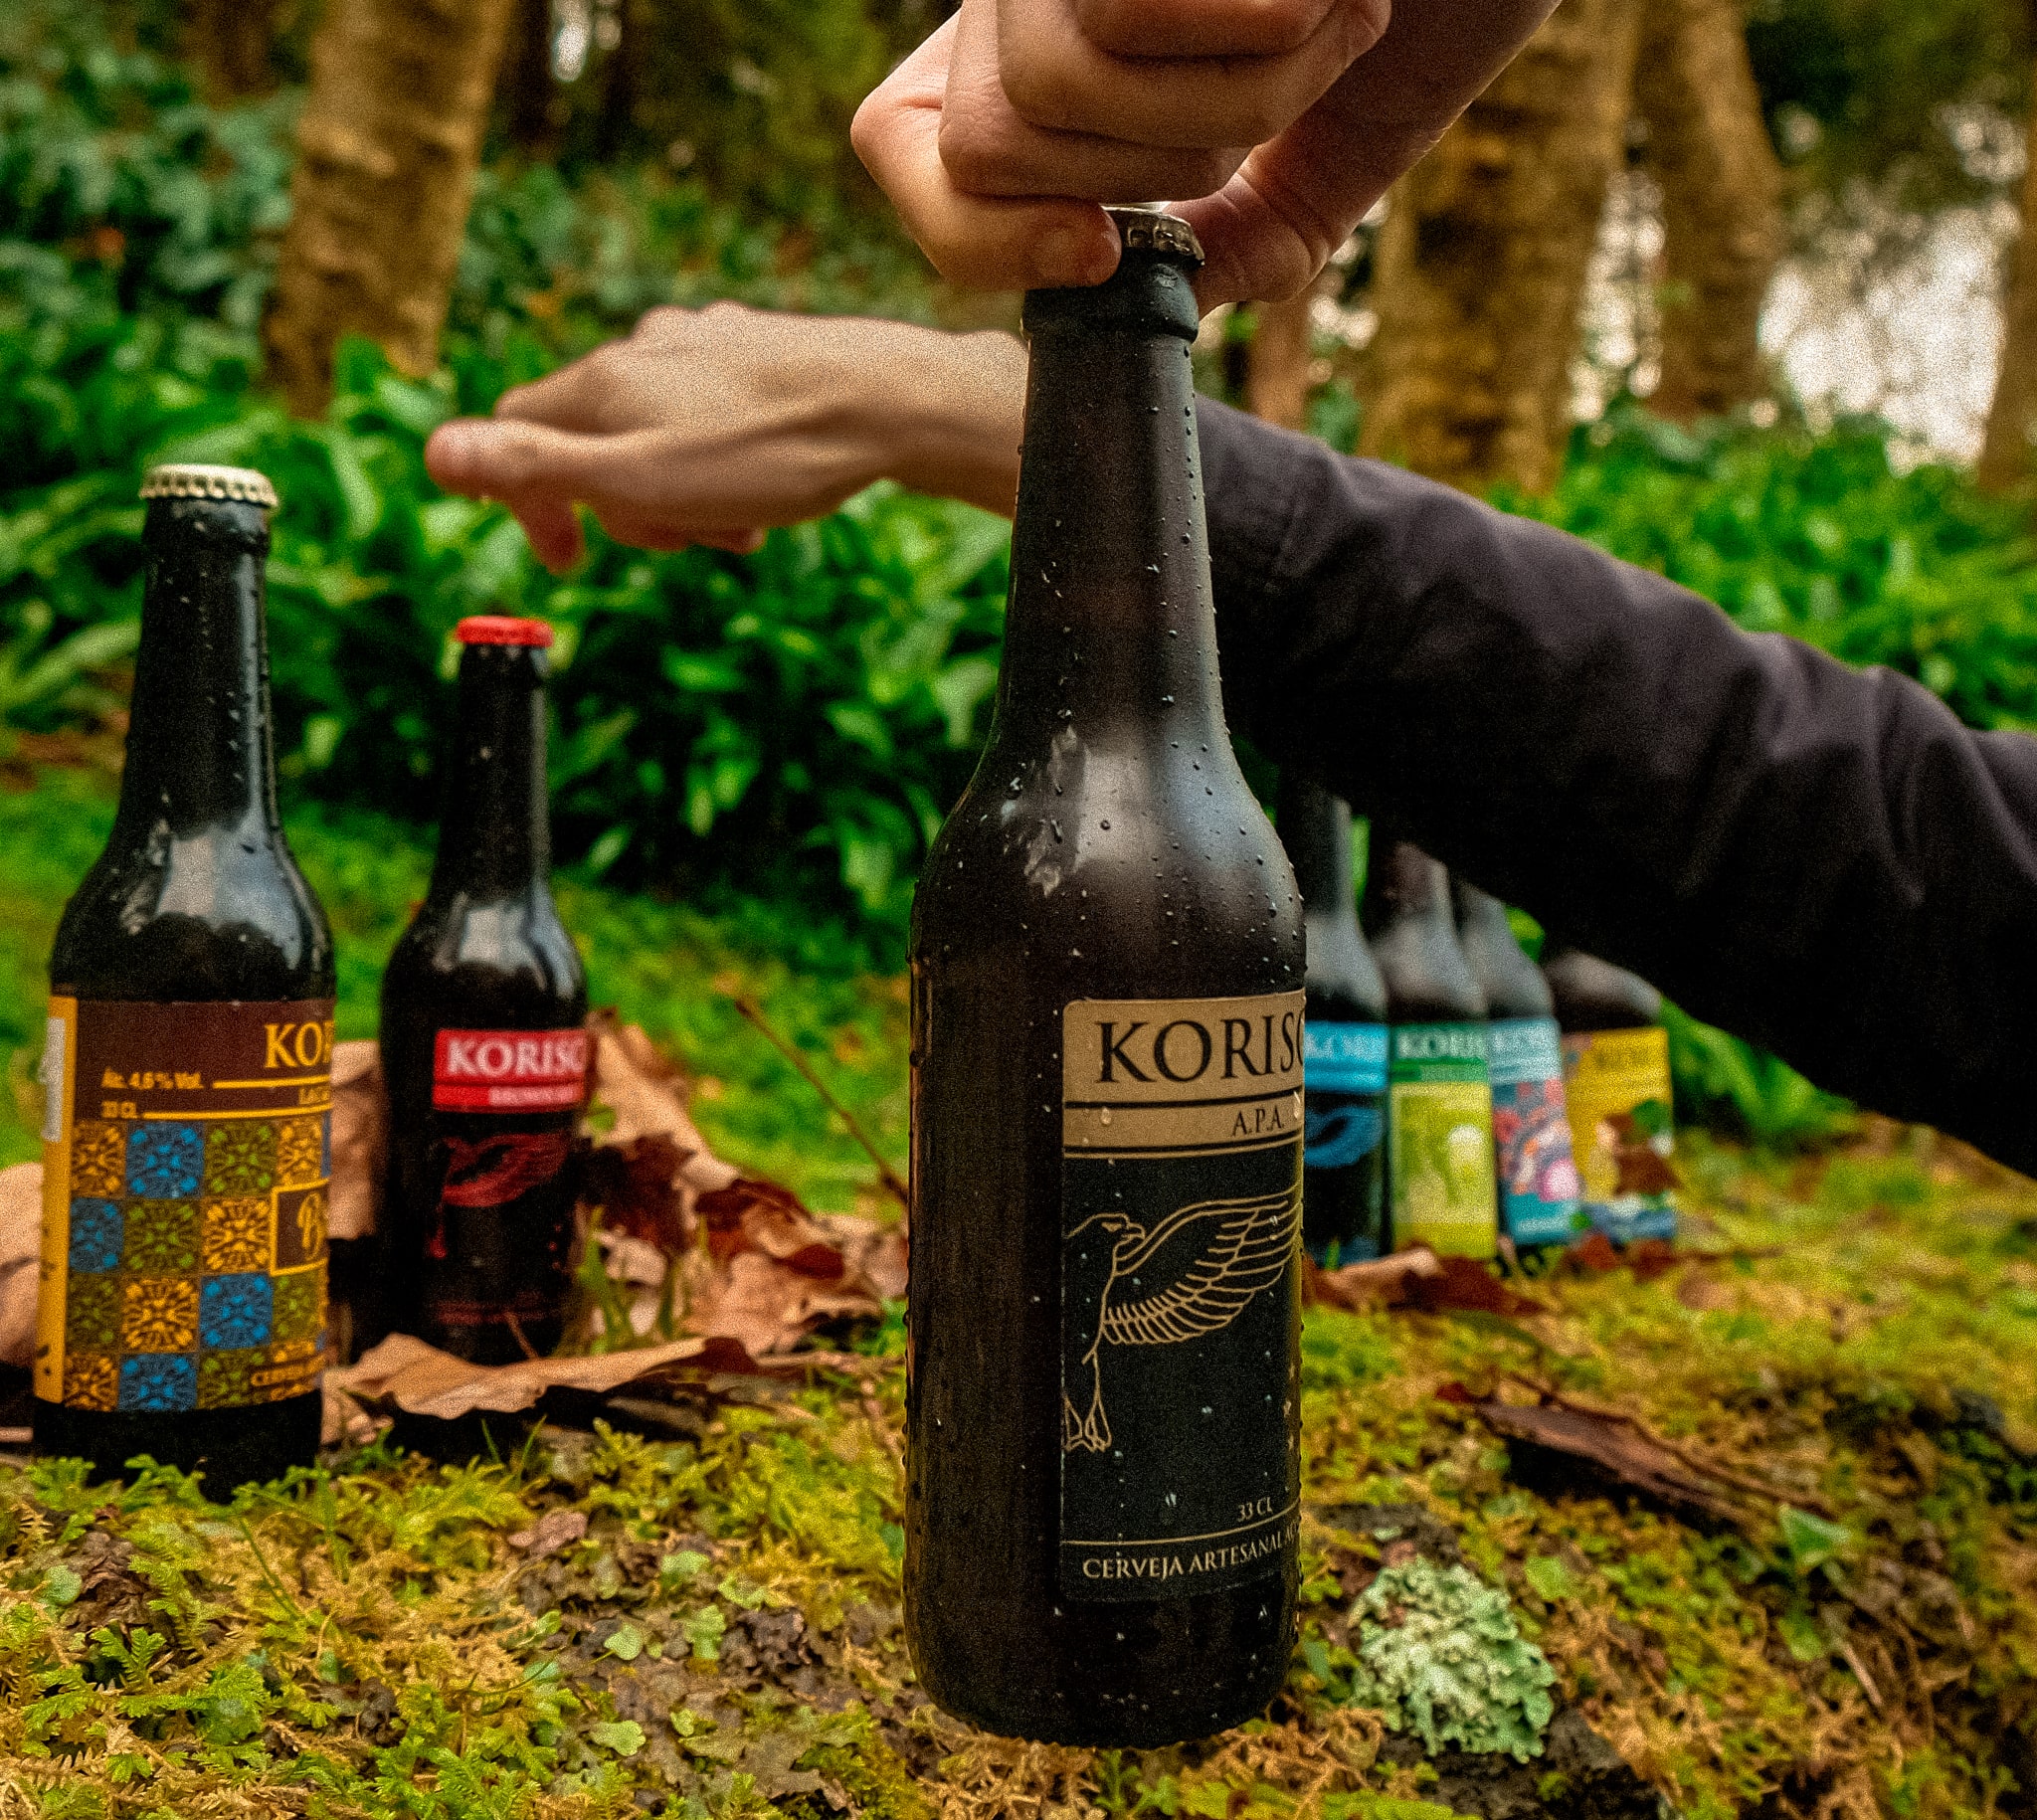 Two hands of a young man, seven Korisca Azorean craft beers, the Clássica II (APA) in the foreground, Bruna (Lager-Helles), Clássica I (Brown Ale), Clássica III (Stout), Petúnia (IPA), Petra (IPA) and Esmeralda (Blonde Ale), on a green and brown mossy ground, with green vegetation and brown tree trunks in the background, in São Miguel, Azores.